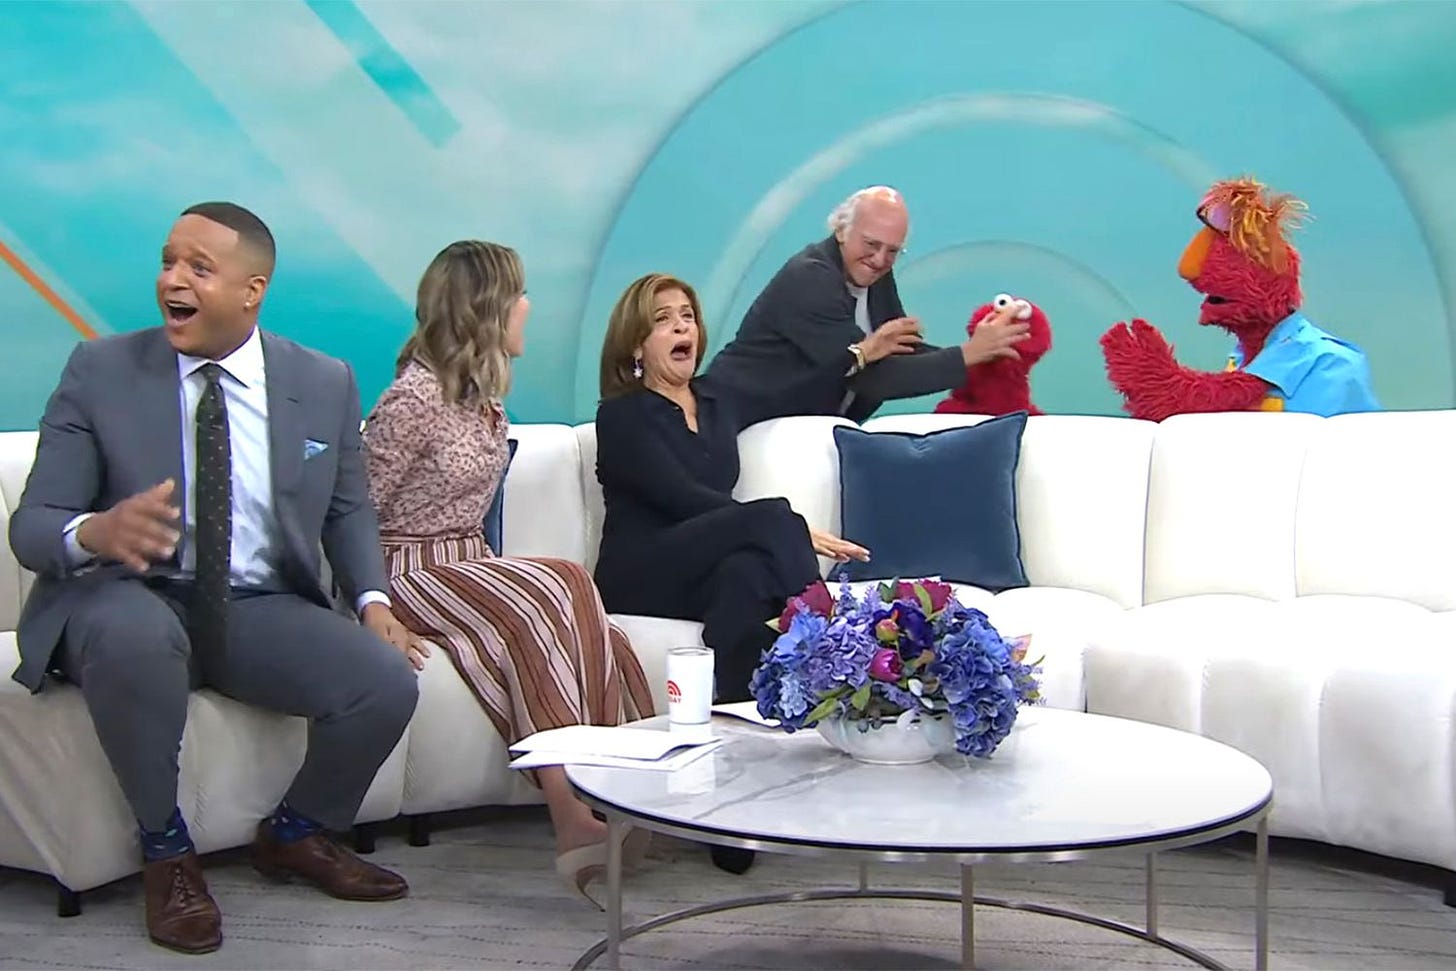 Larry David on the Today Show strangling Elmo. The hosts all look shocked and scandalized.